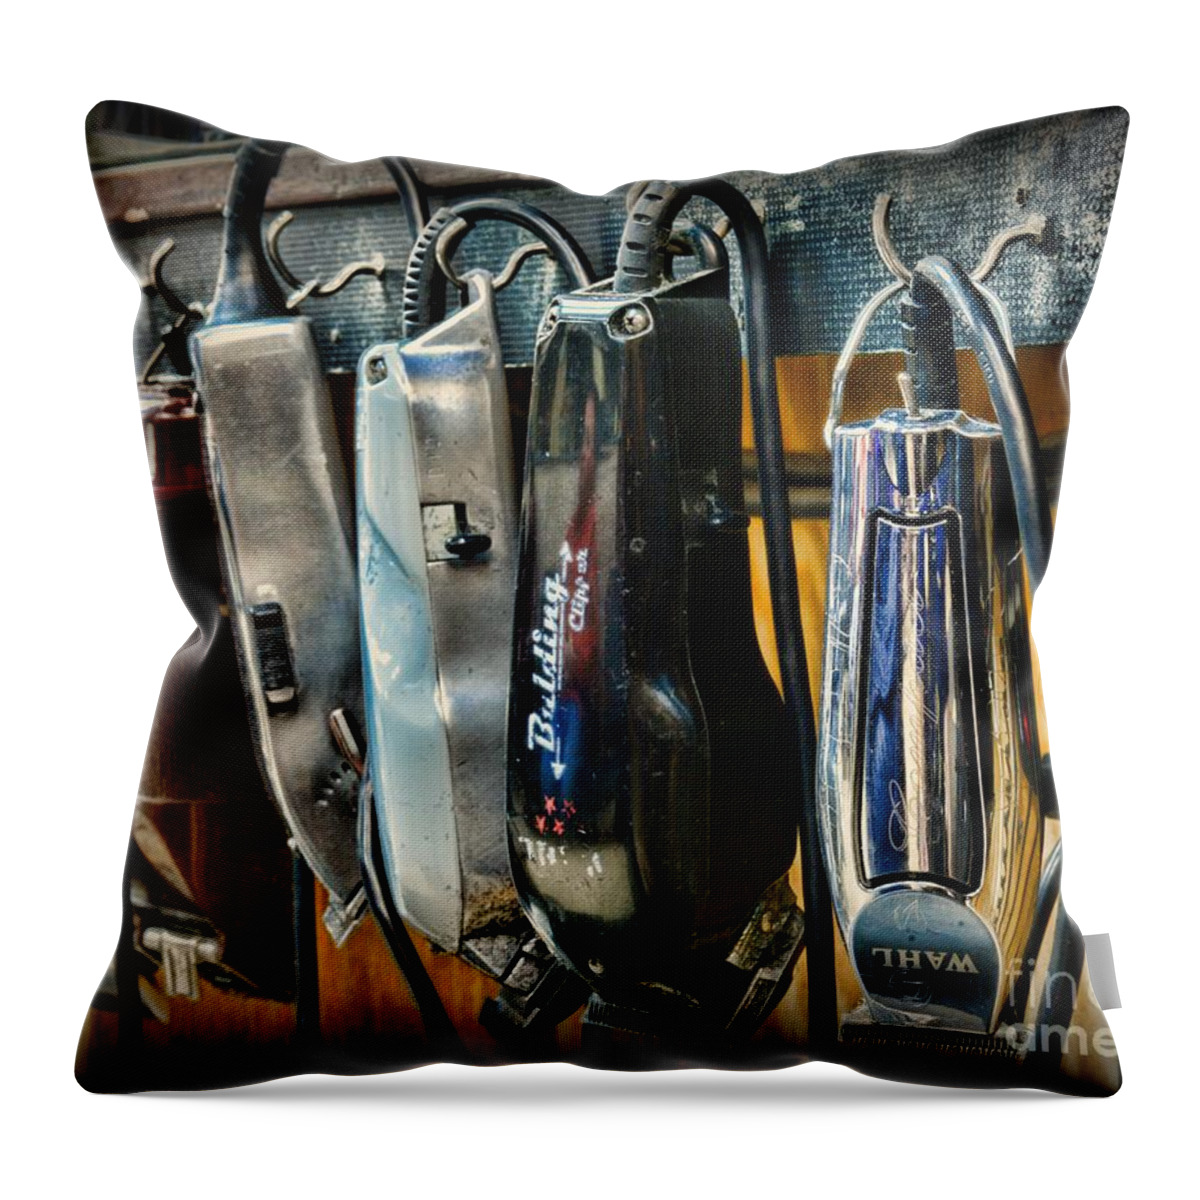 Vintage Barber Throw Pillow featuring the photograph Barber - Hair Clippers by Paul Ward